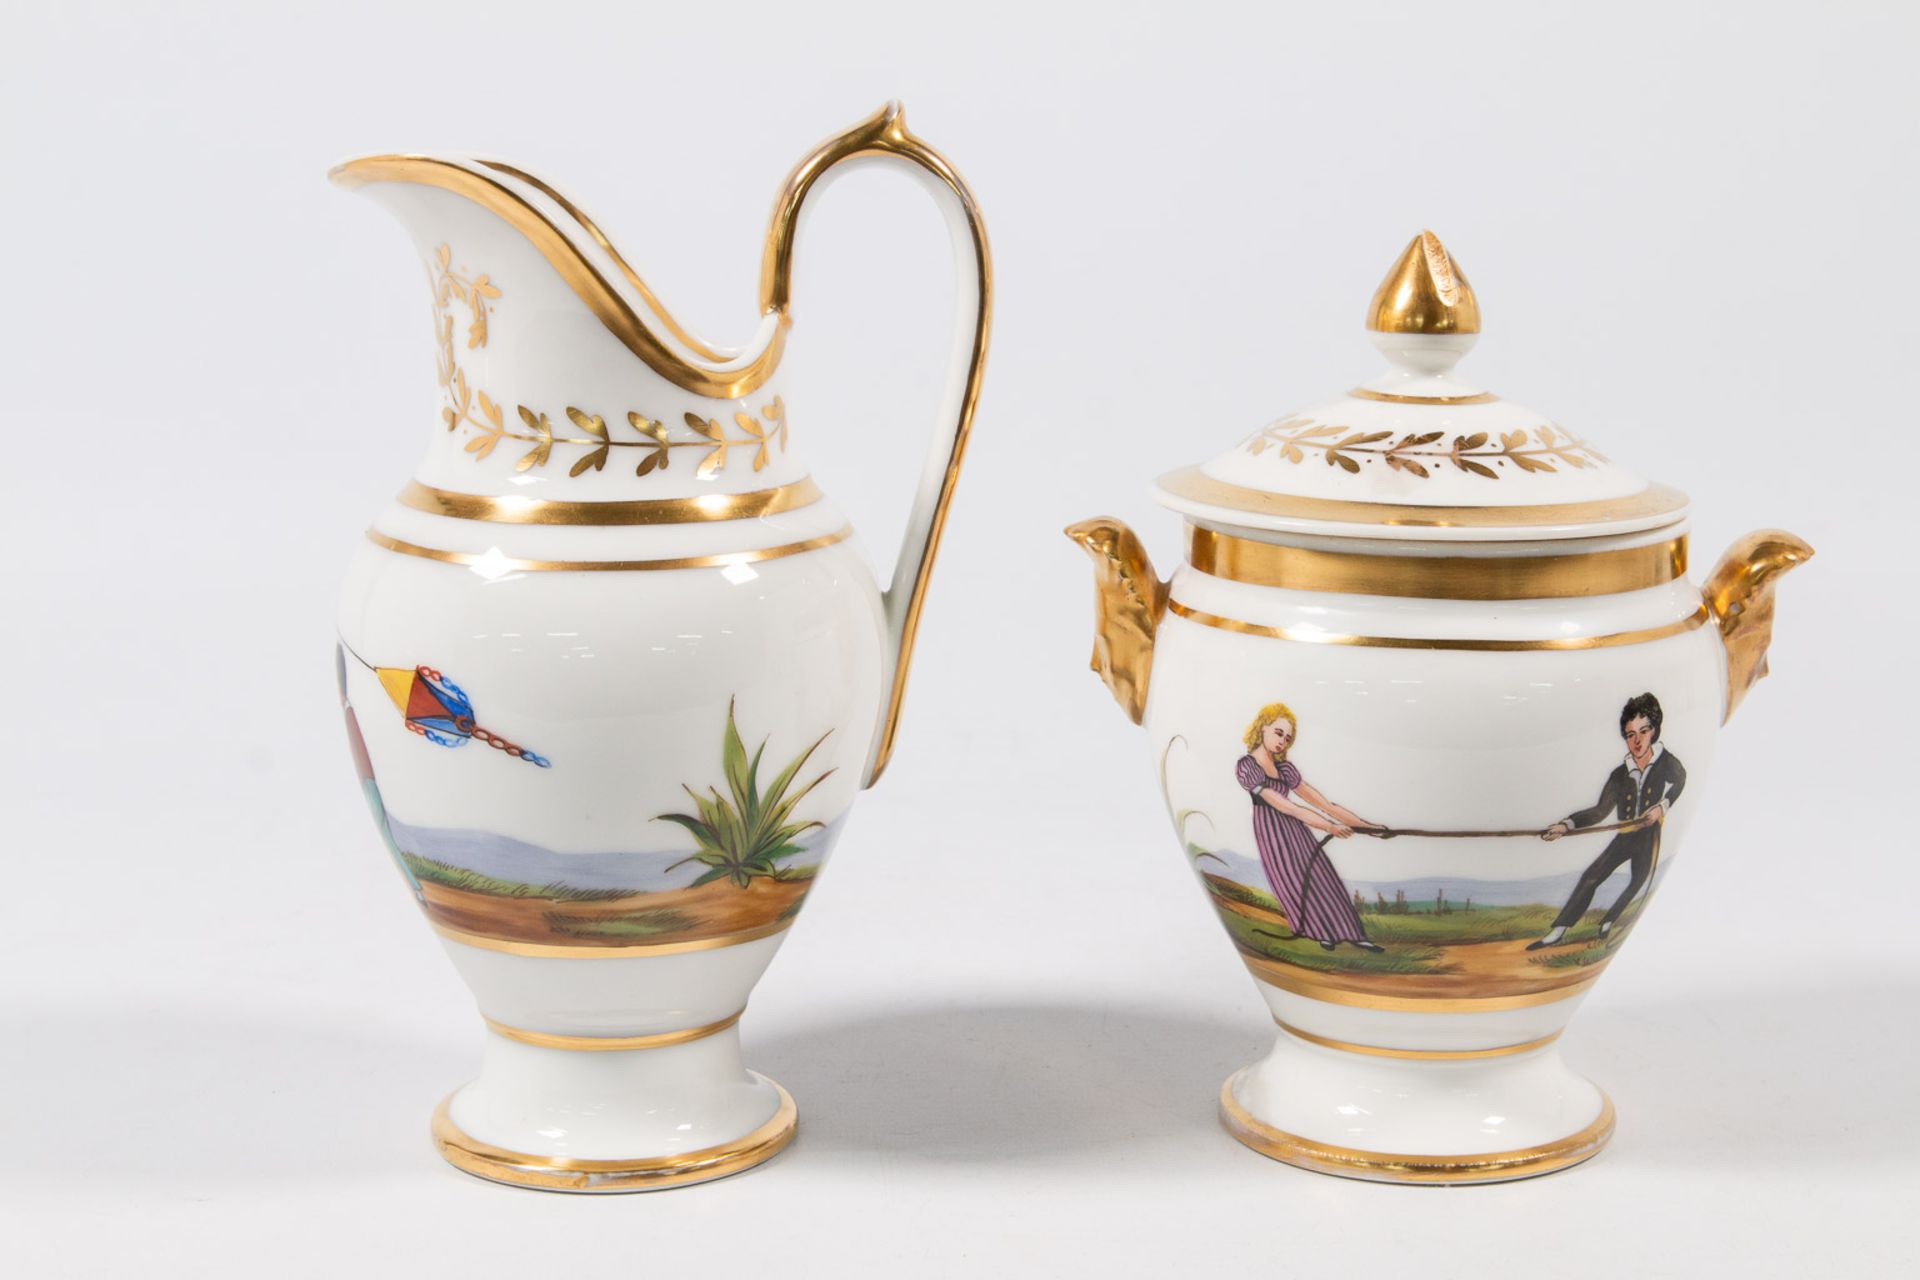 A Complete 'Vieux Bruxelles' coffee and tea service made of porcelain. - Image 44 of 53